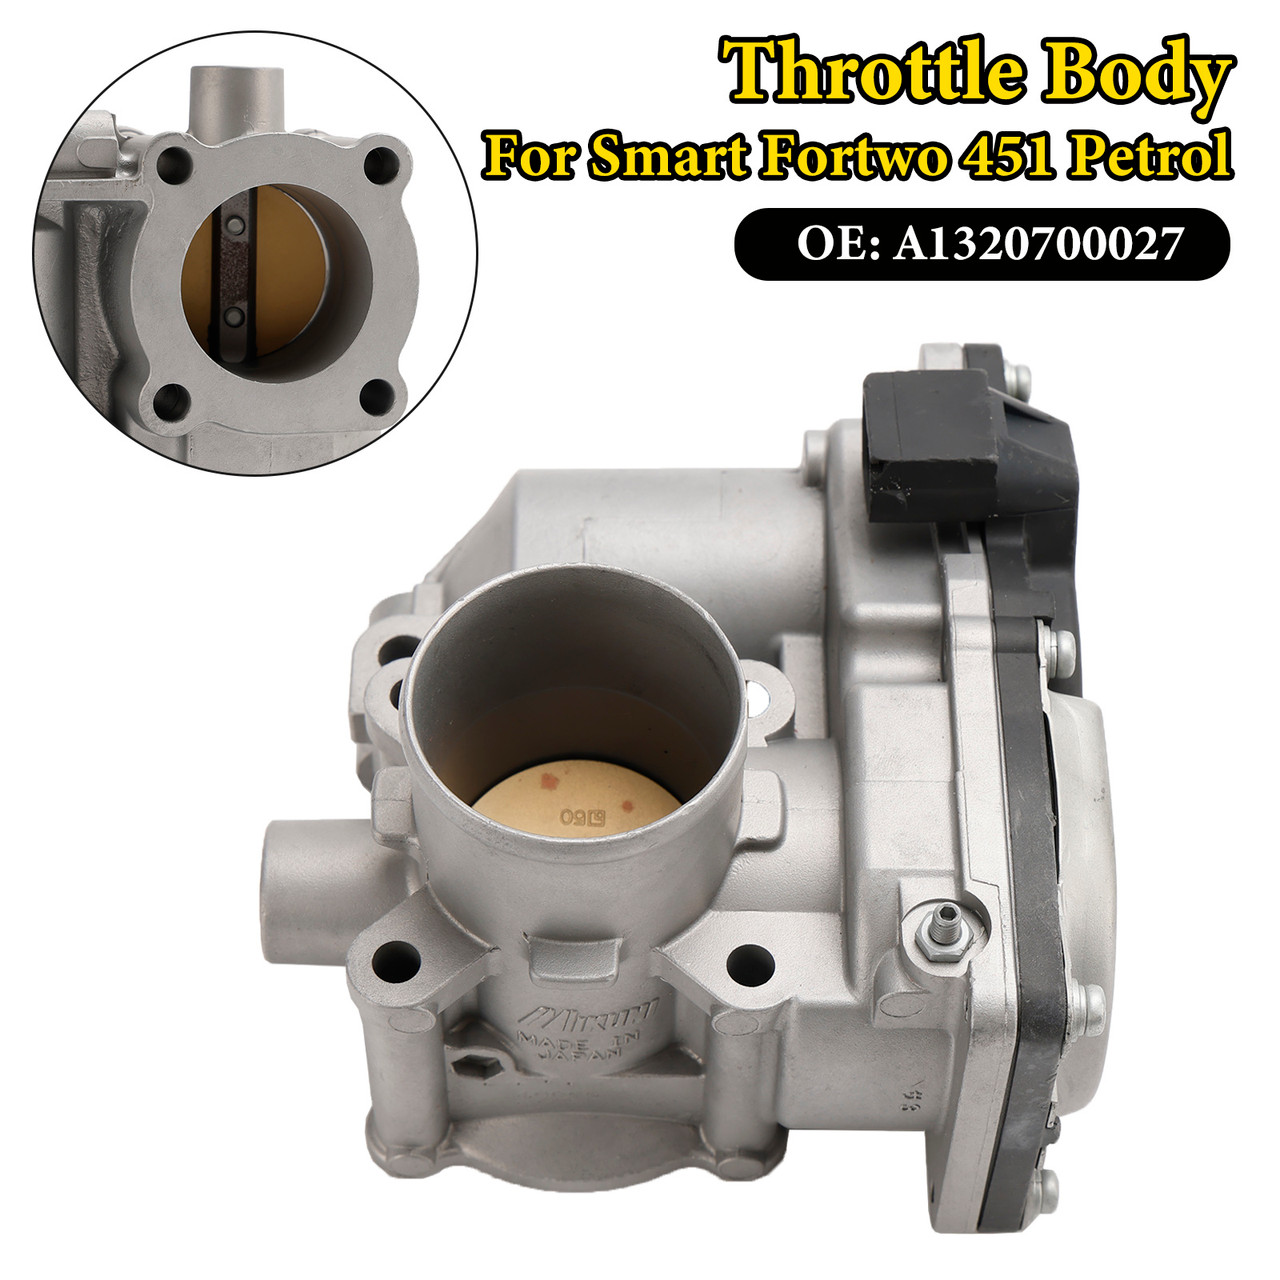 Throttle Body A1320700027 For Smart Fortwo 1.0L Pure/Passion 2008-2015